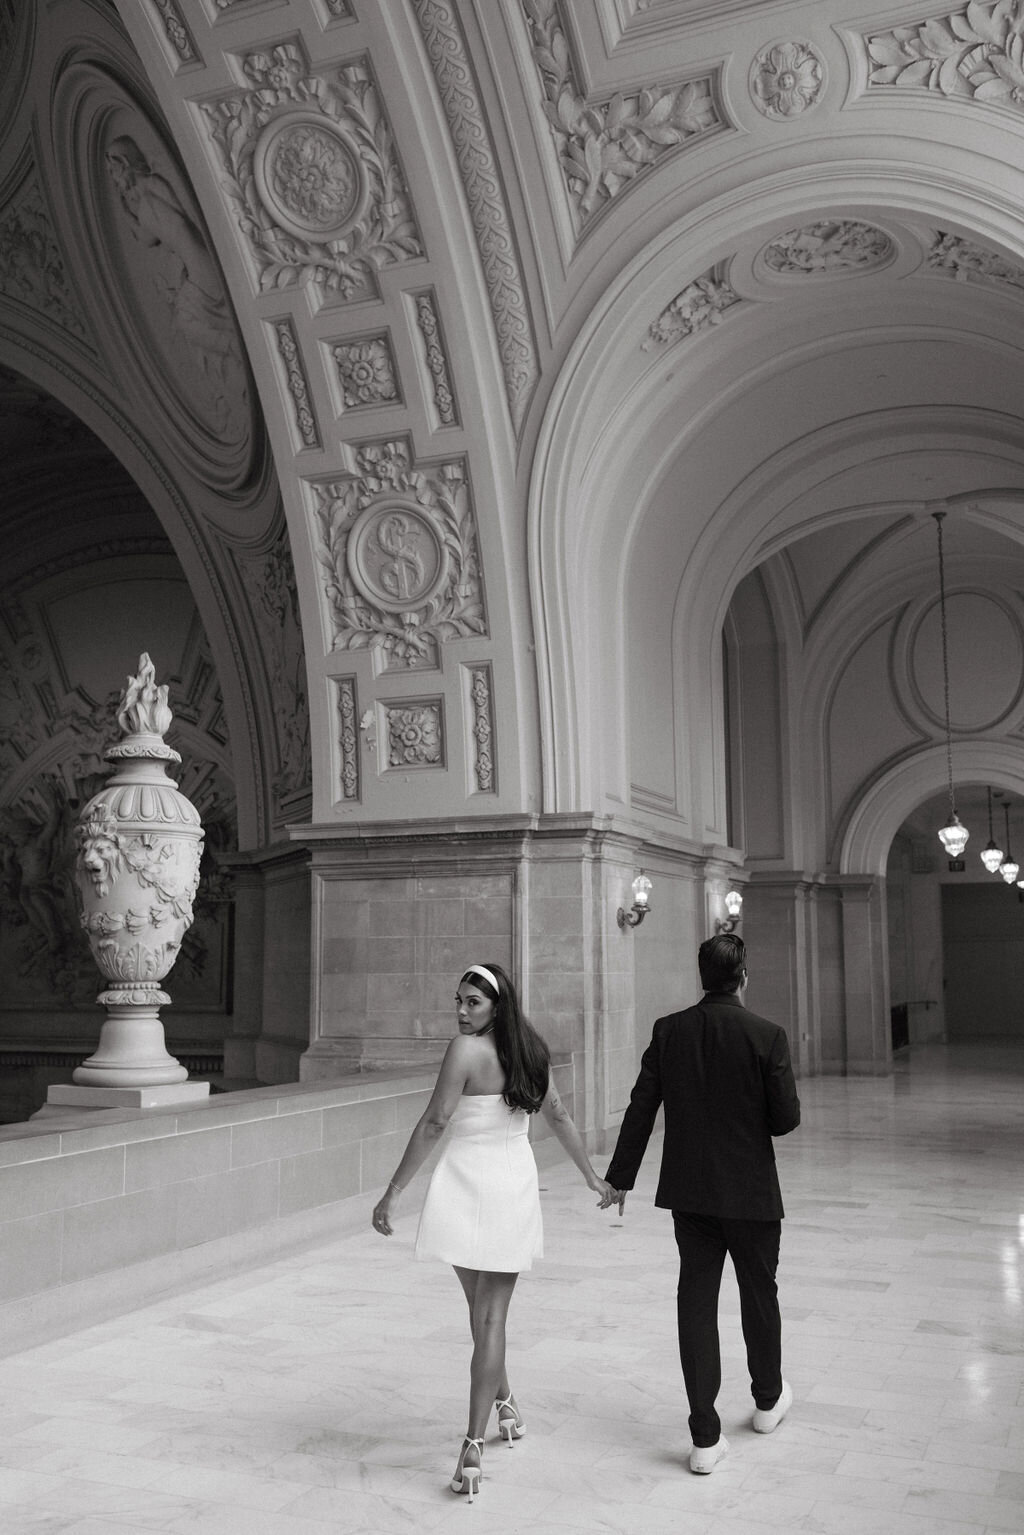 A couple holding hands walks through an ornate hallway in San Francisco City Hall, with the woman in a white dress looking back and the man in a suit leading forward.